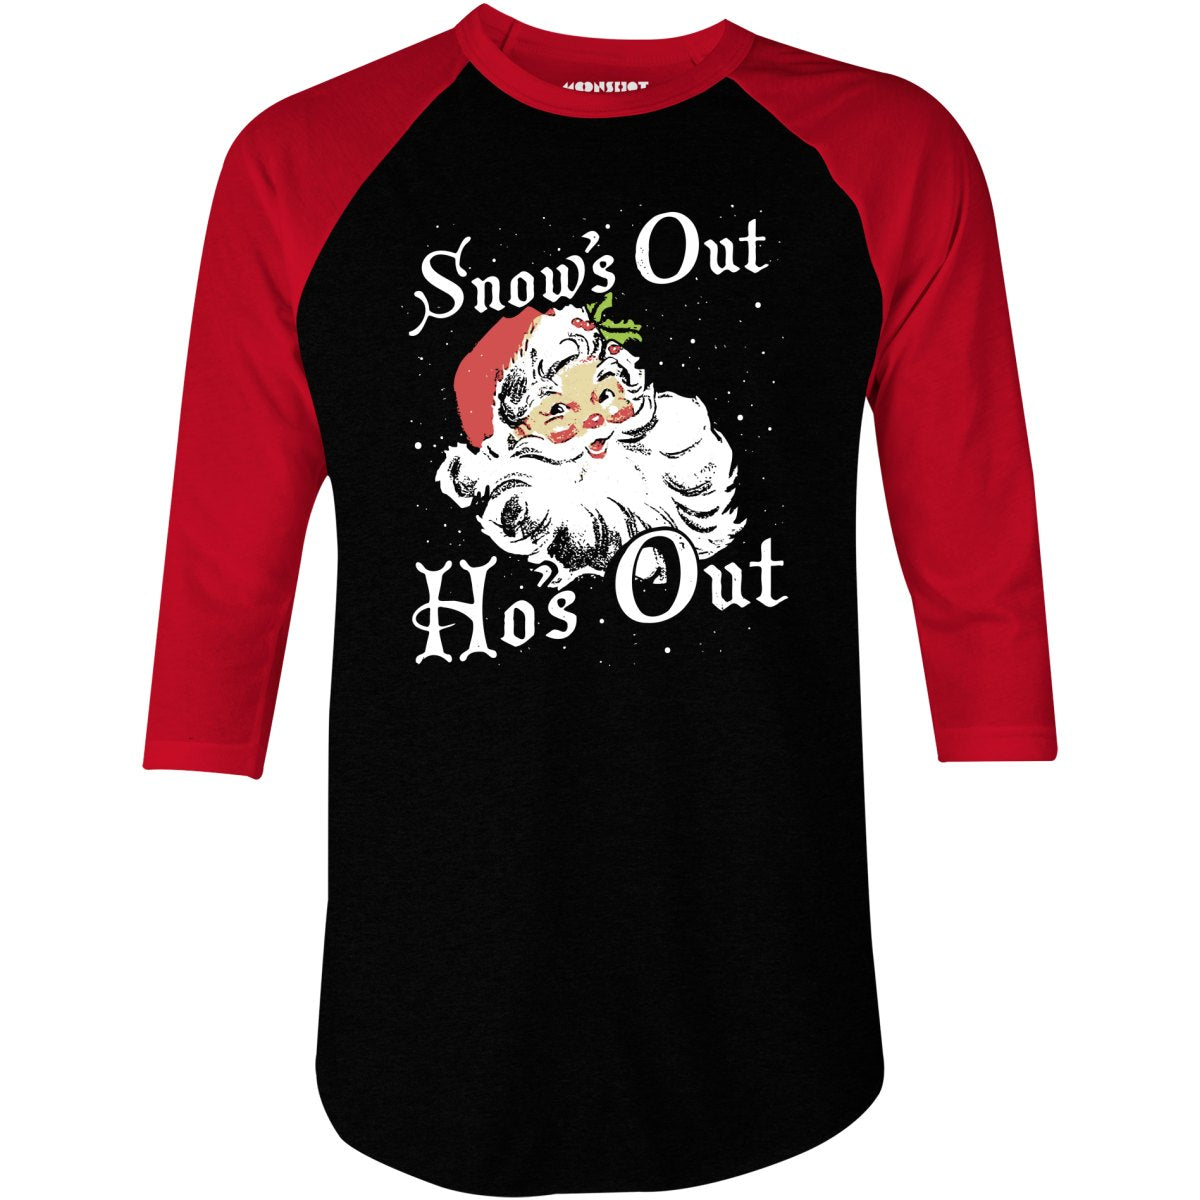 Snow's Out Ho's Out - 3/4 Sleeve Raglan T-Shirt